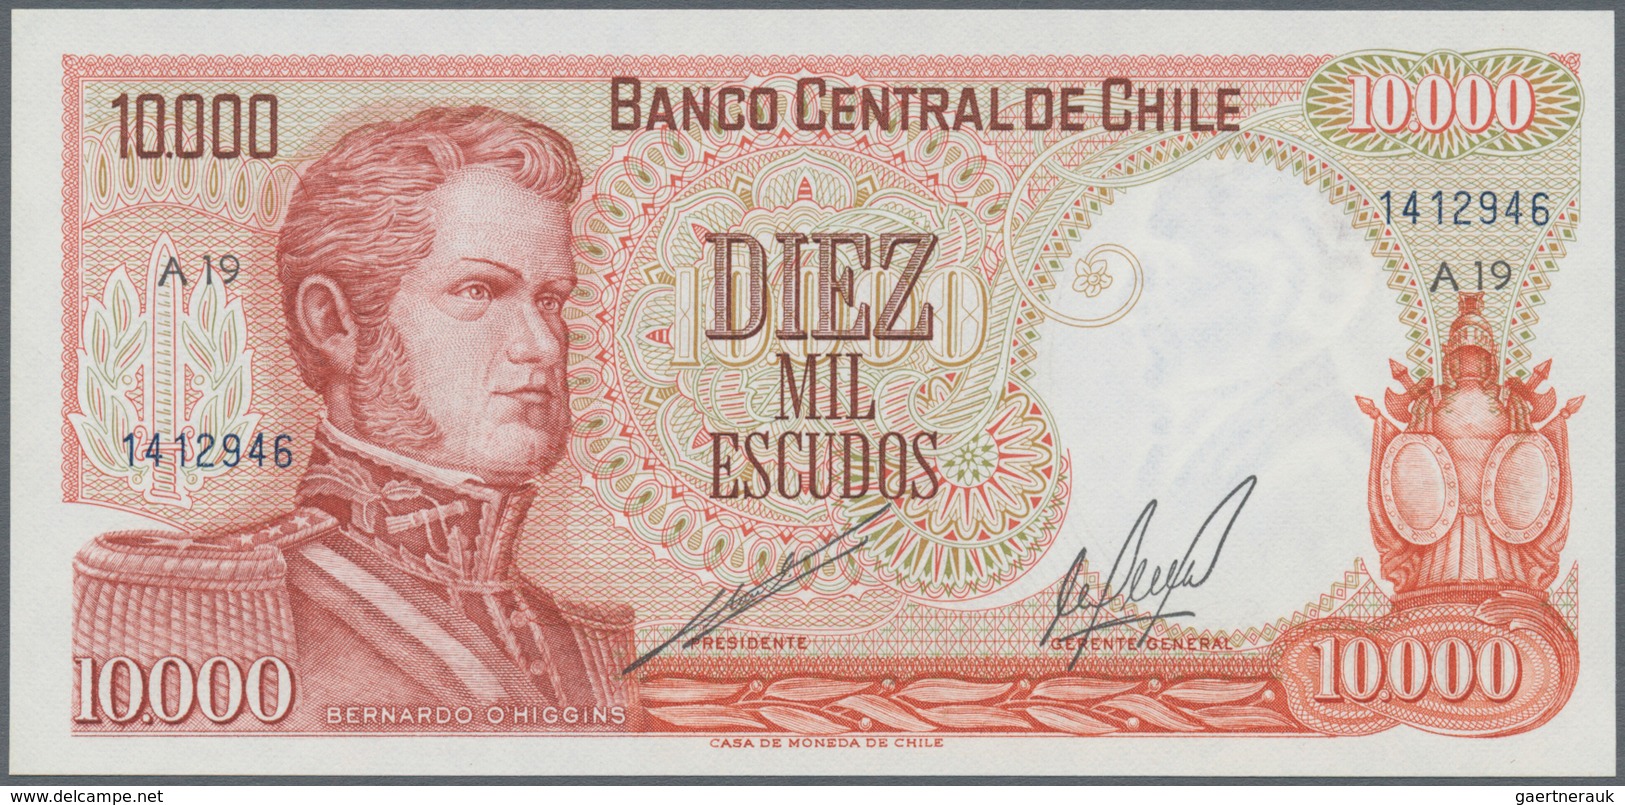 South America / Südamerika: larger lot of about 500 notes from South America in red collectors album